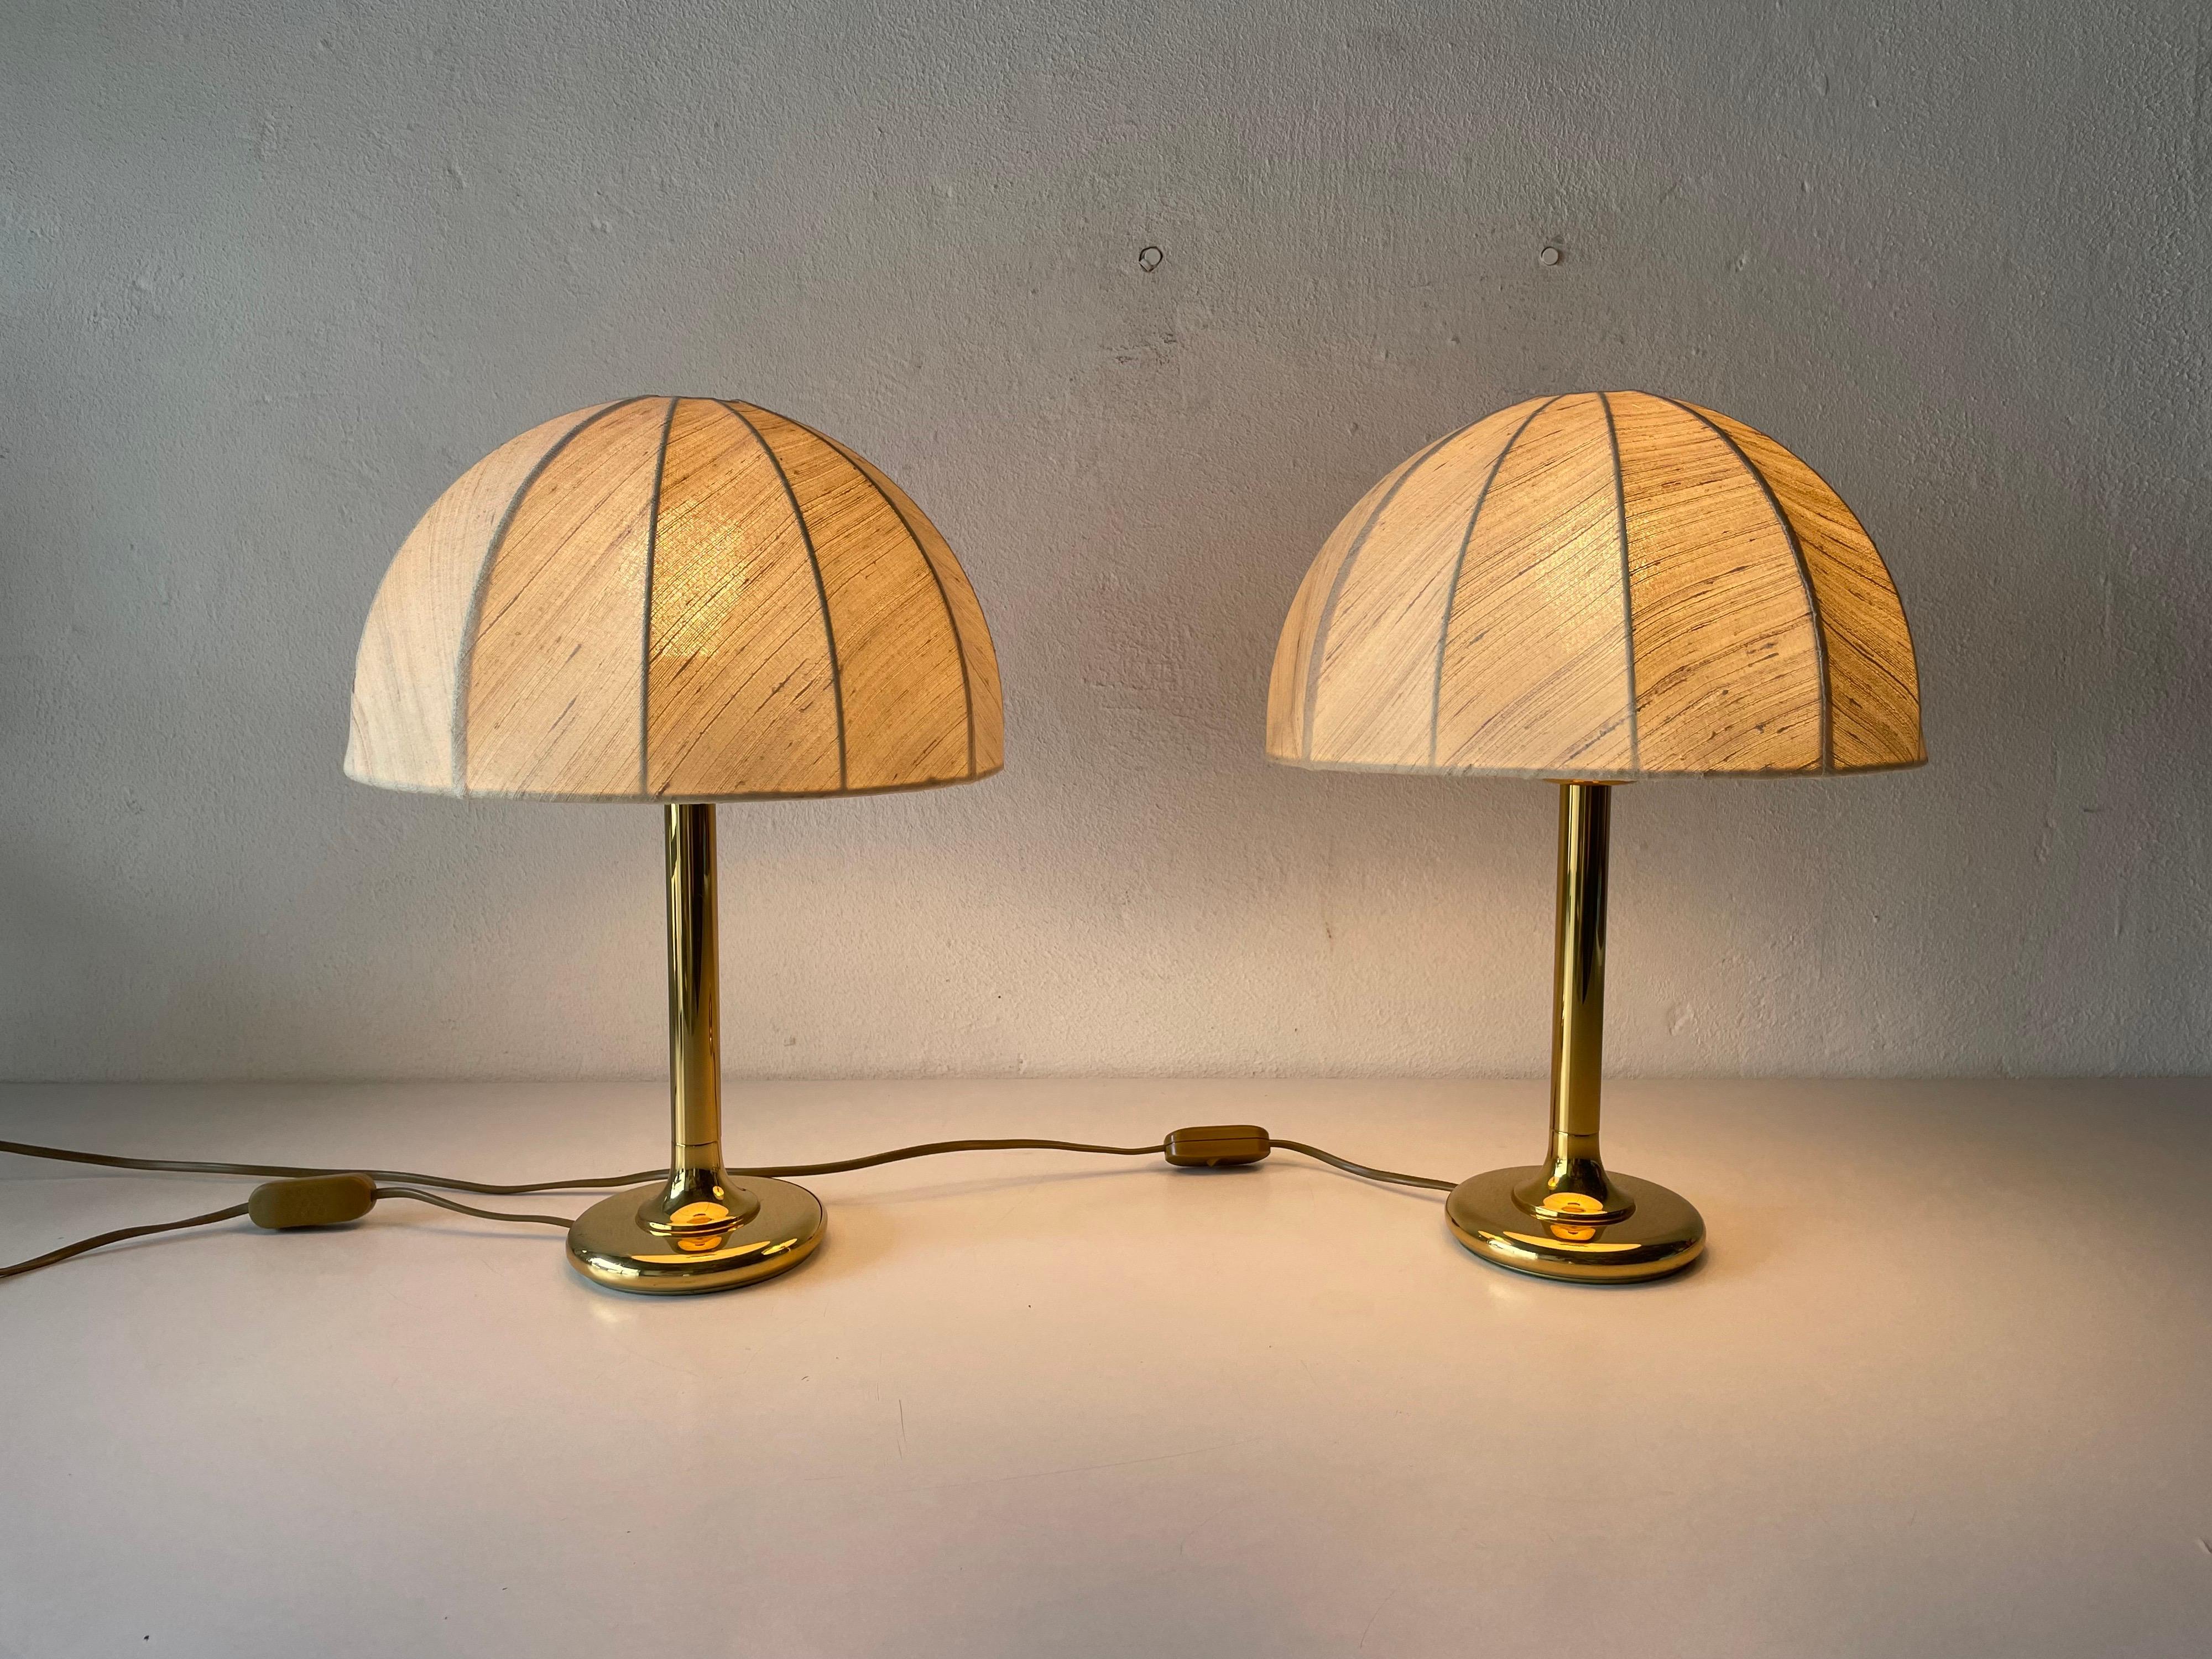 Fabric Shade & Brass Body Elegant Pair of Bedside Lamps by ERU, 1980s, Germany 1